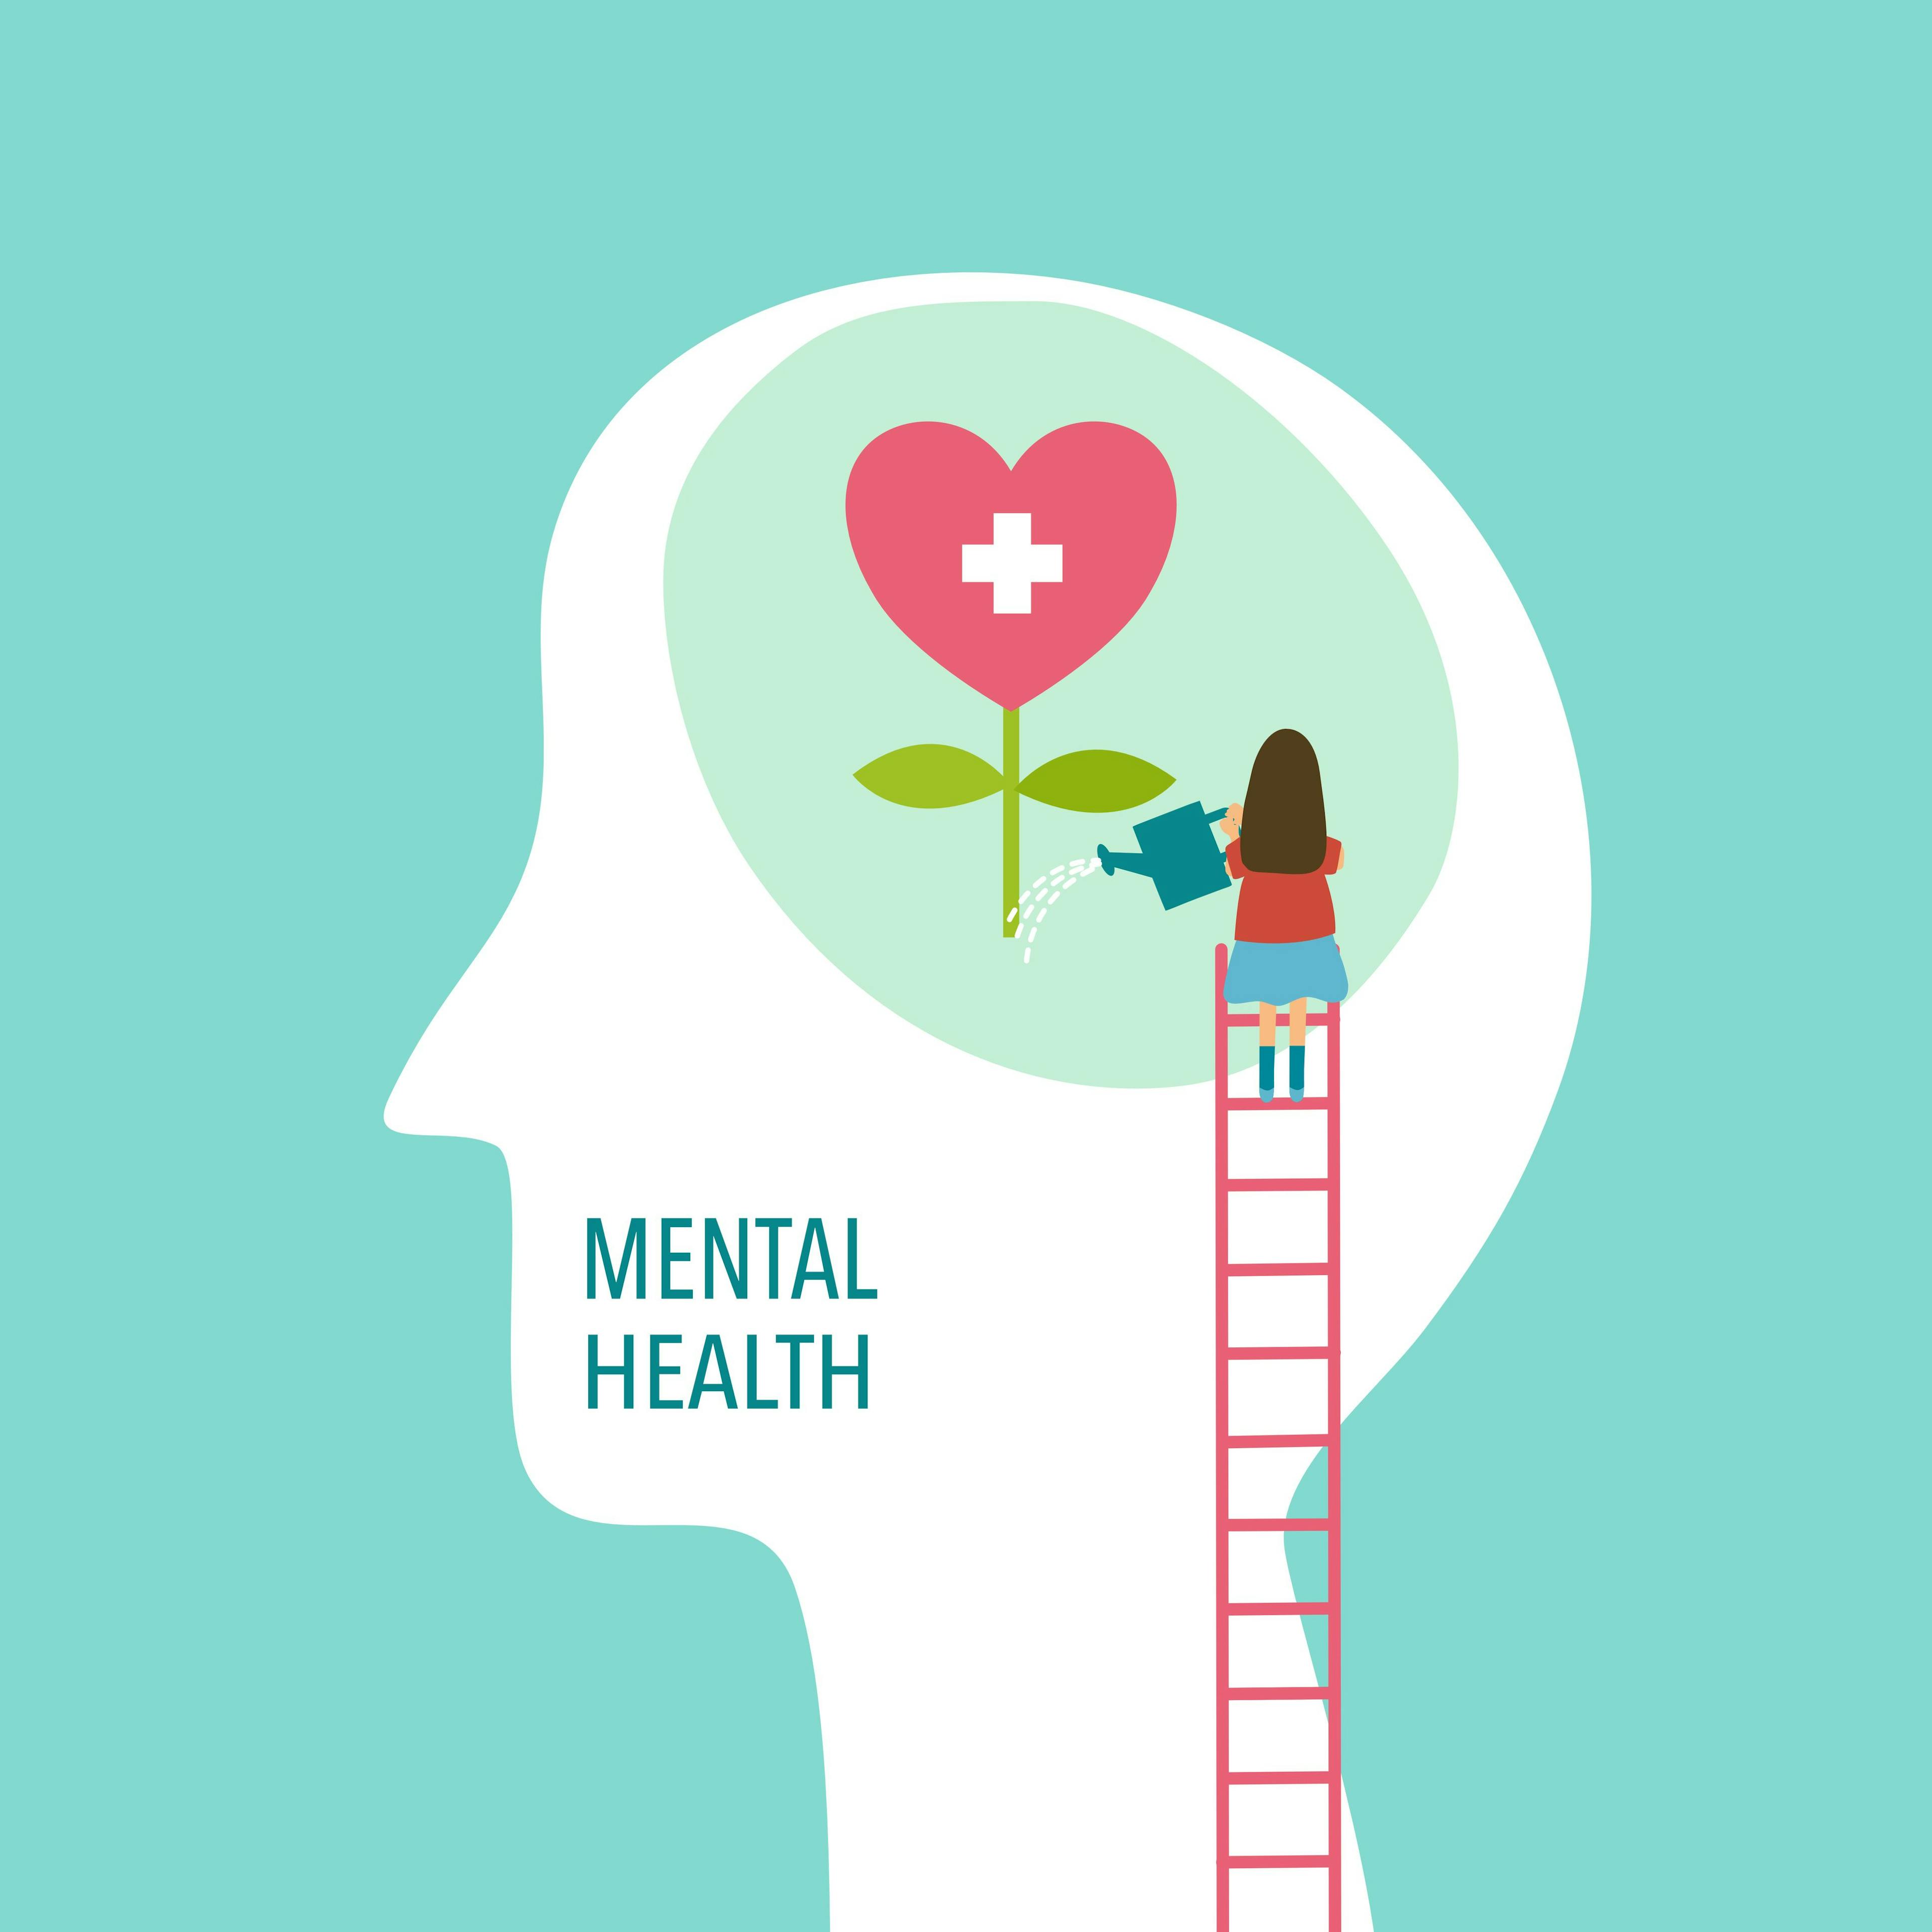 Report: Employers to make mental health and wellbeing a top priority